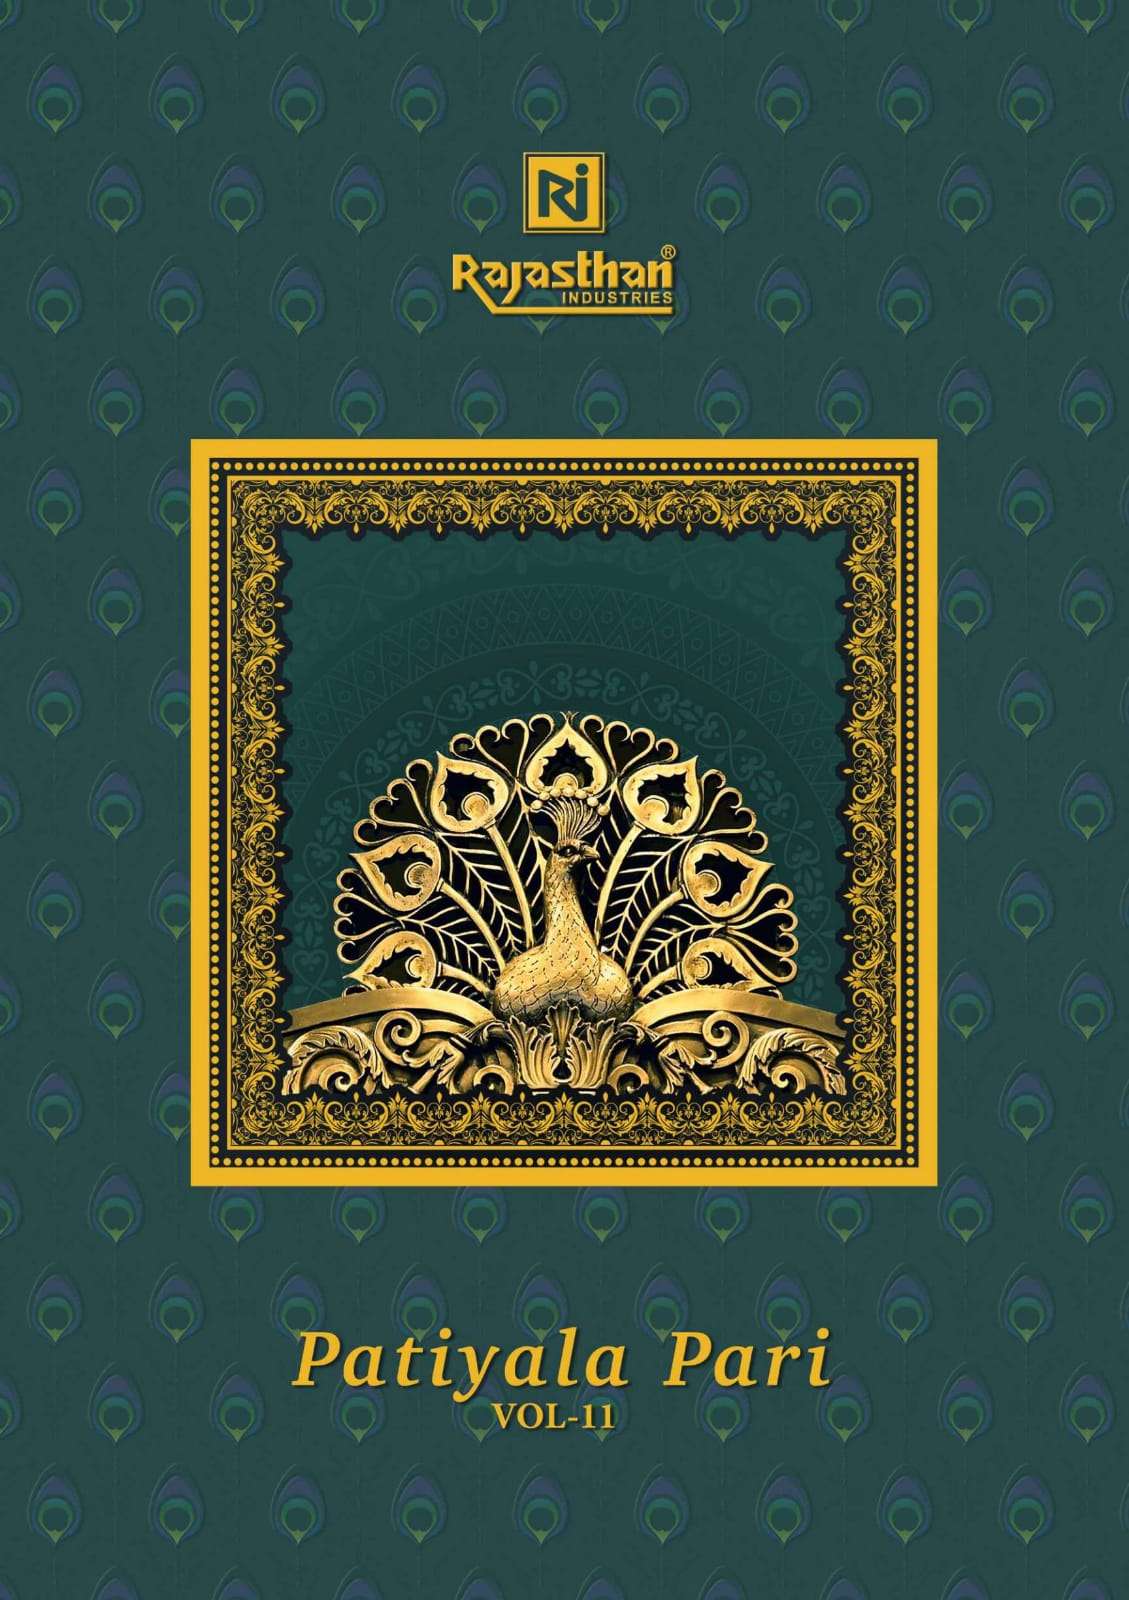 Patiyala Pari Vol 11 By Rajasthan Readymade Cotton Daily Wear Collection Wholesale Online Supplier Cotton Salwar Suit Catalog